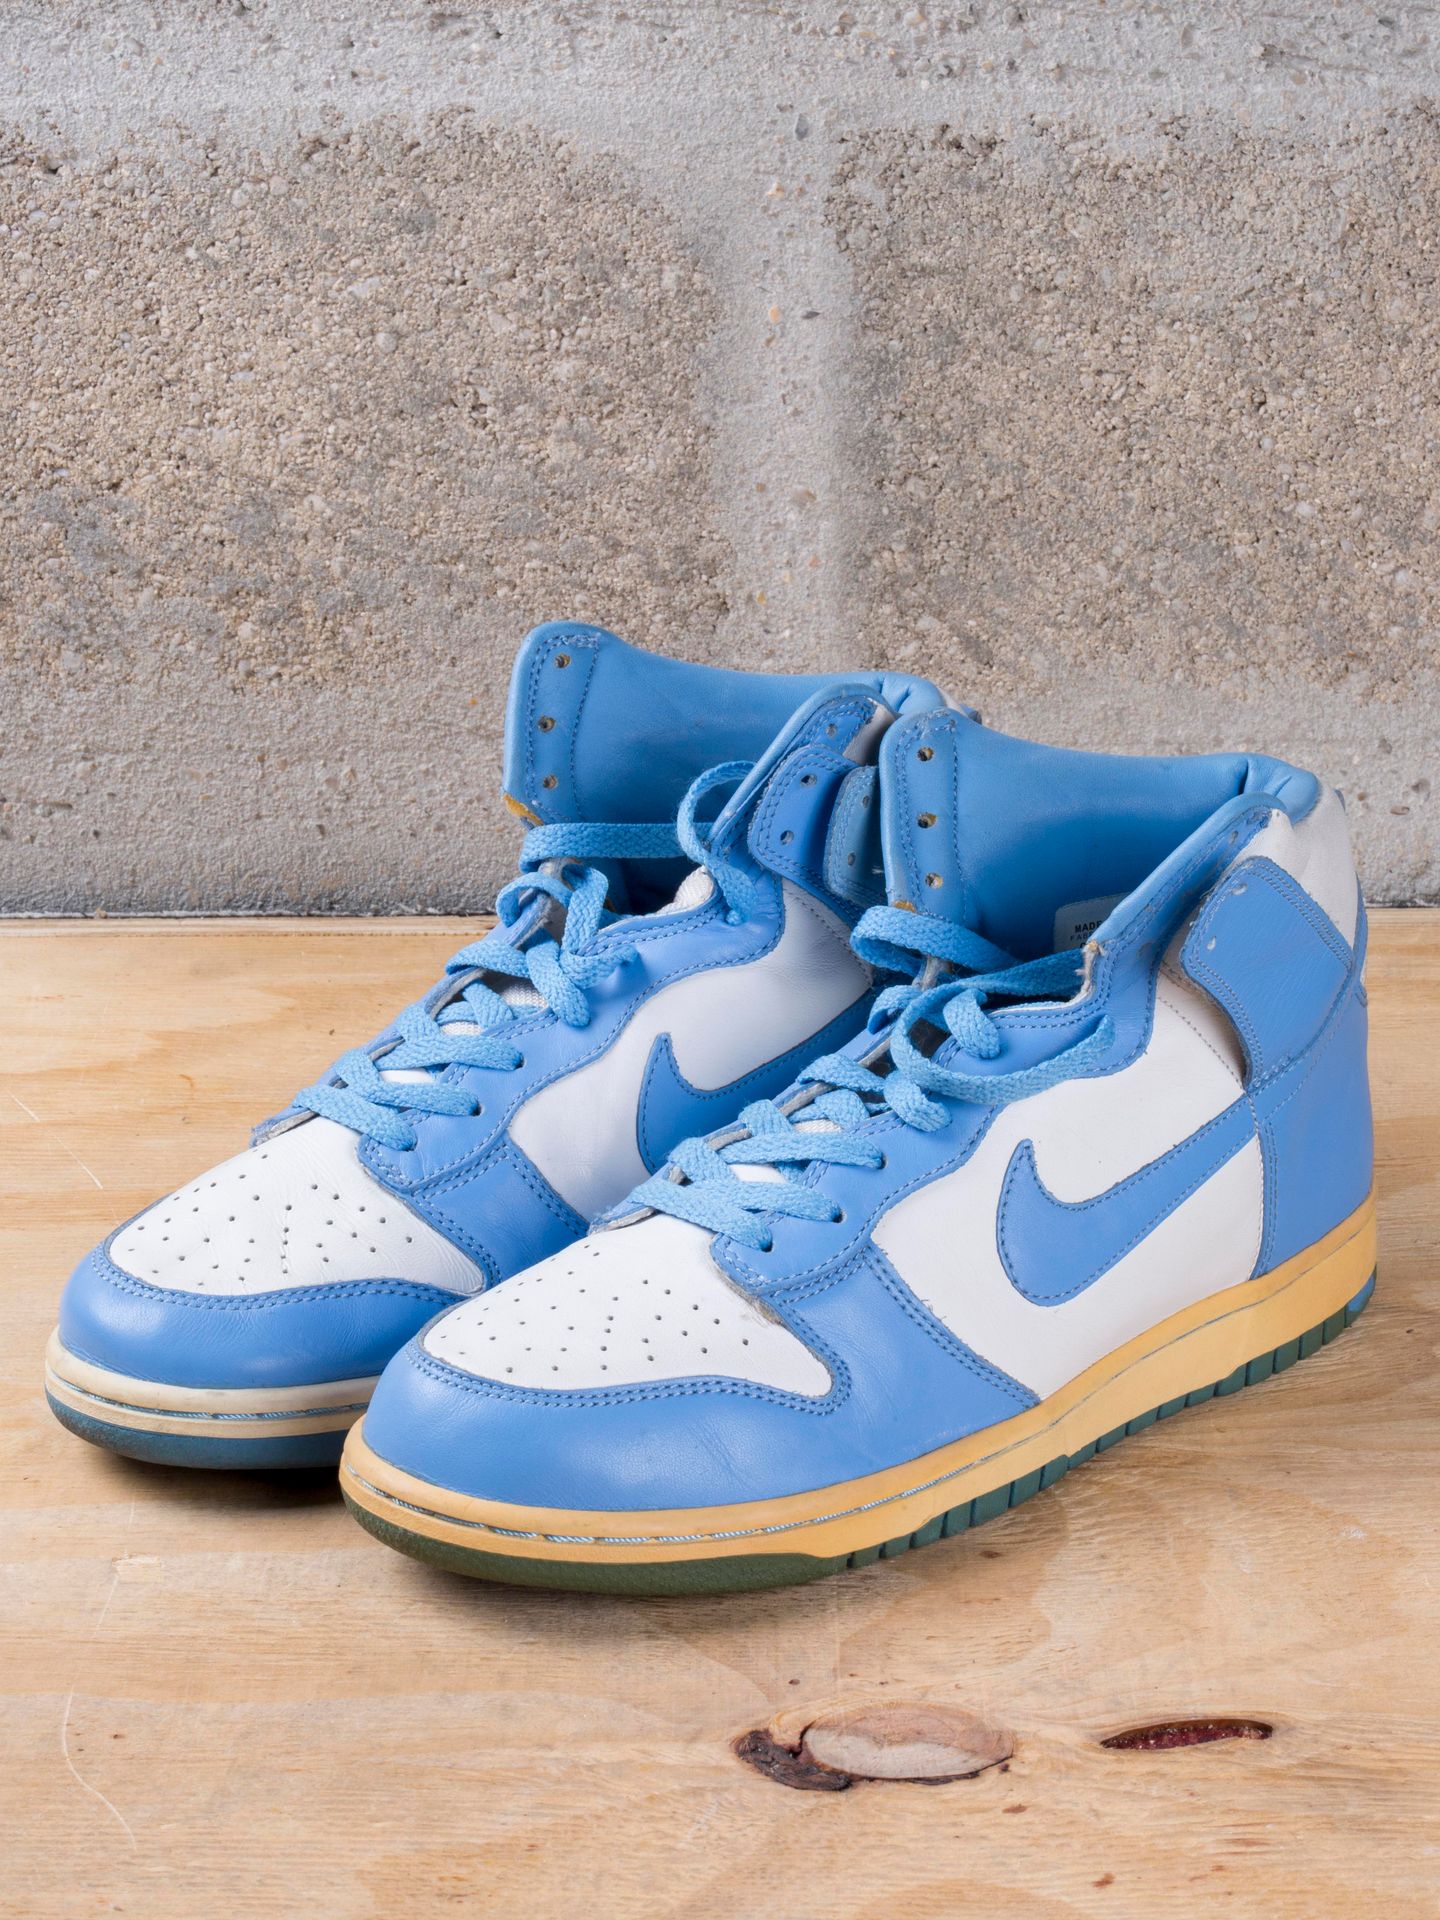 Null NIKE DUNK

HIGH UNC (2004)

(309432-142)

US 8 / EU 41

(Used condition)